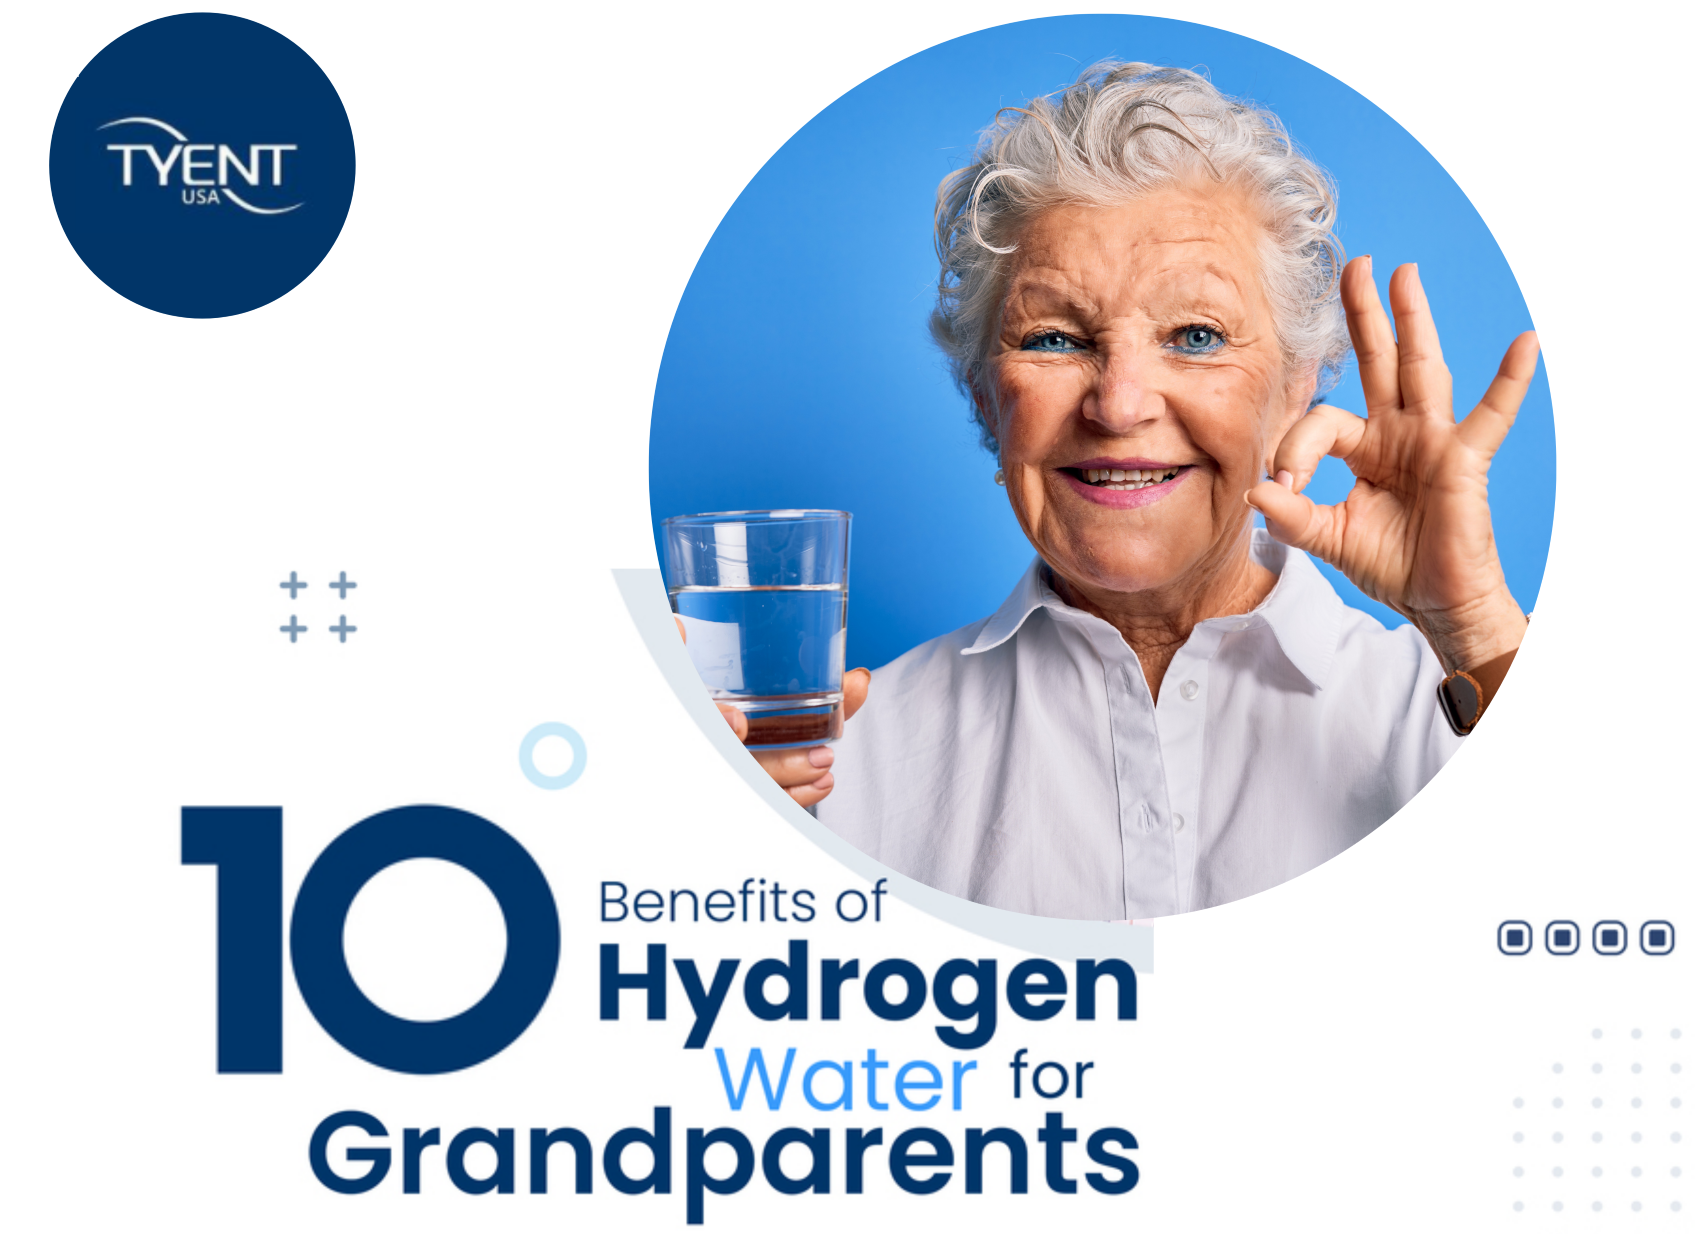 10 Benefits of Hydrogen Water for Grandparents